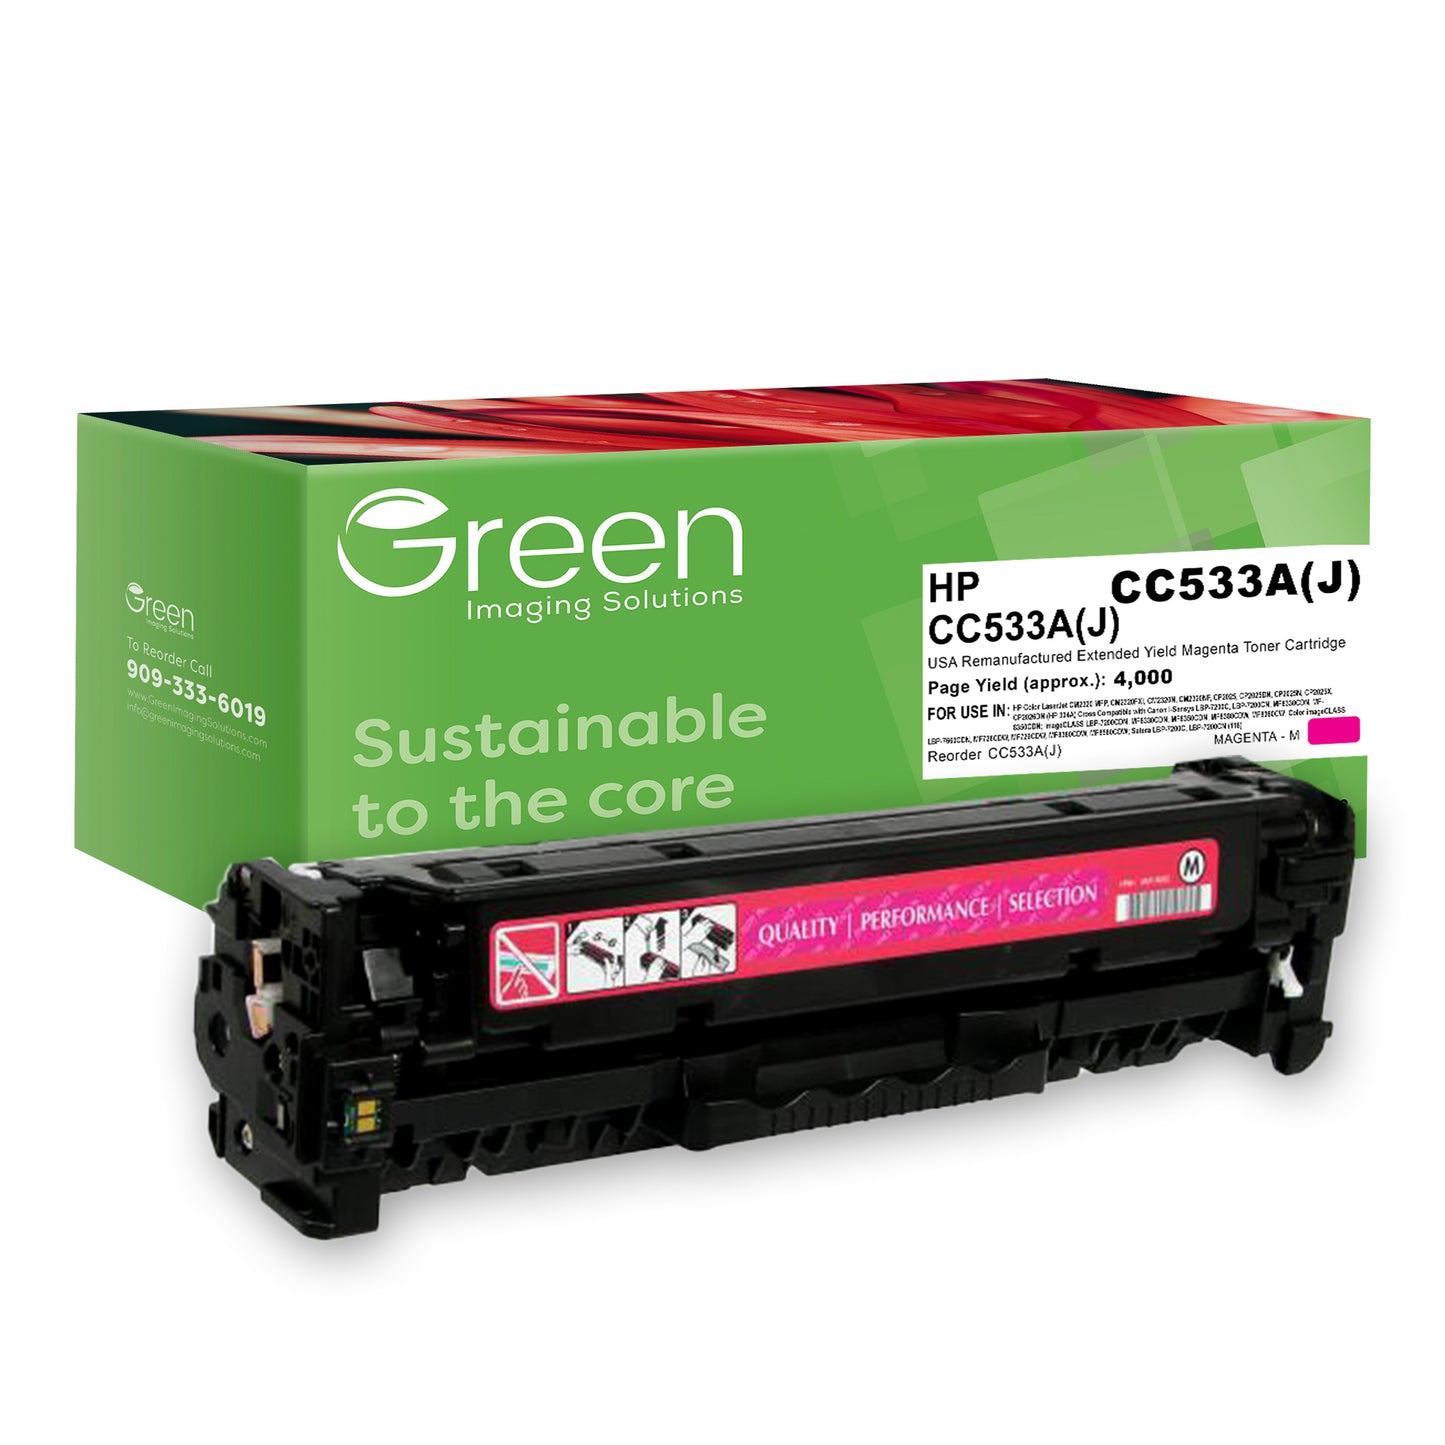 GIS USA Remanufactured Extended Yield Magenta Toner Cartridge for HP CC533A (HP 304A)